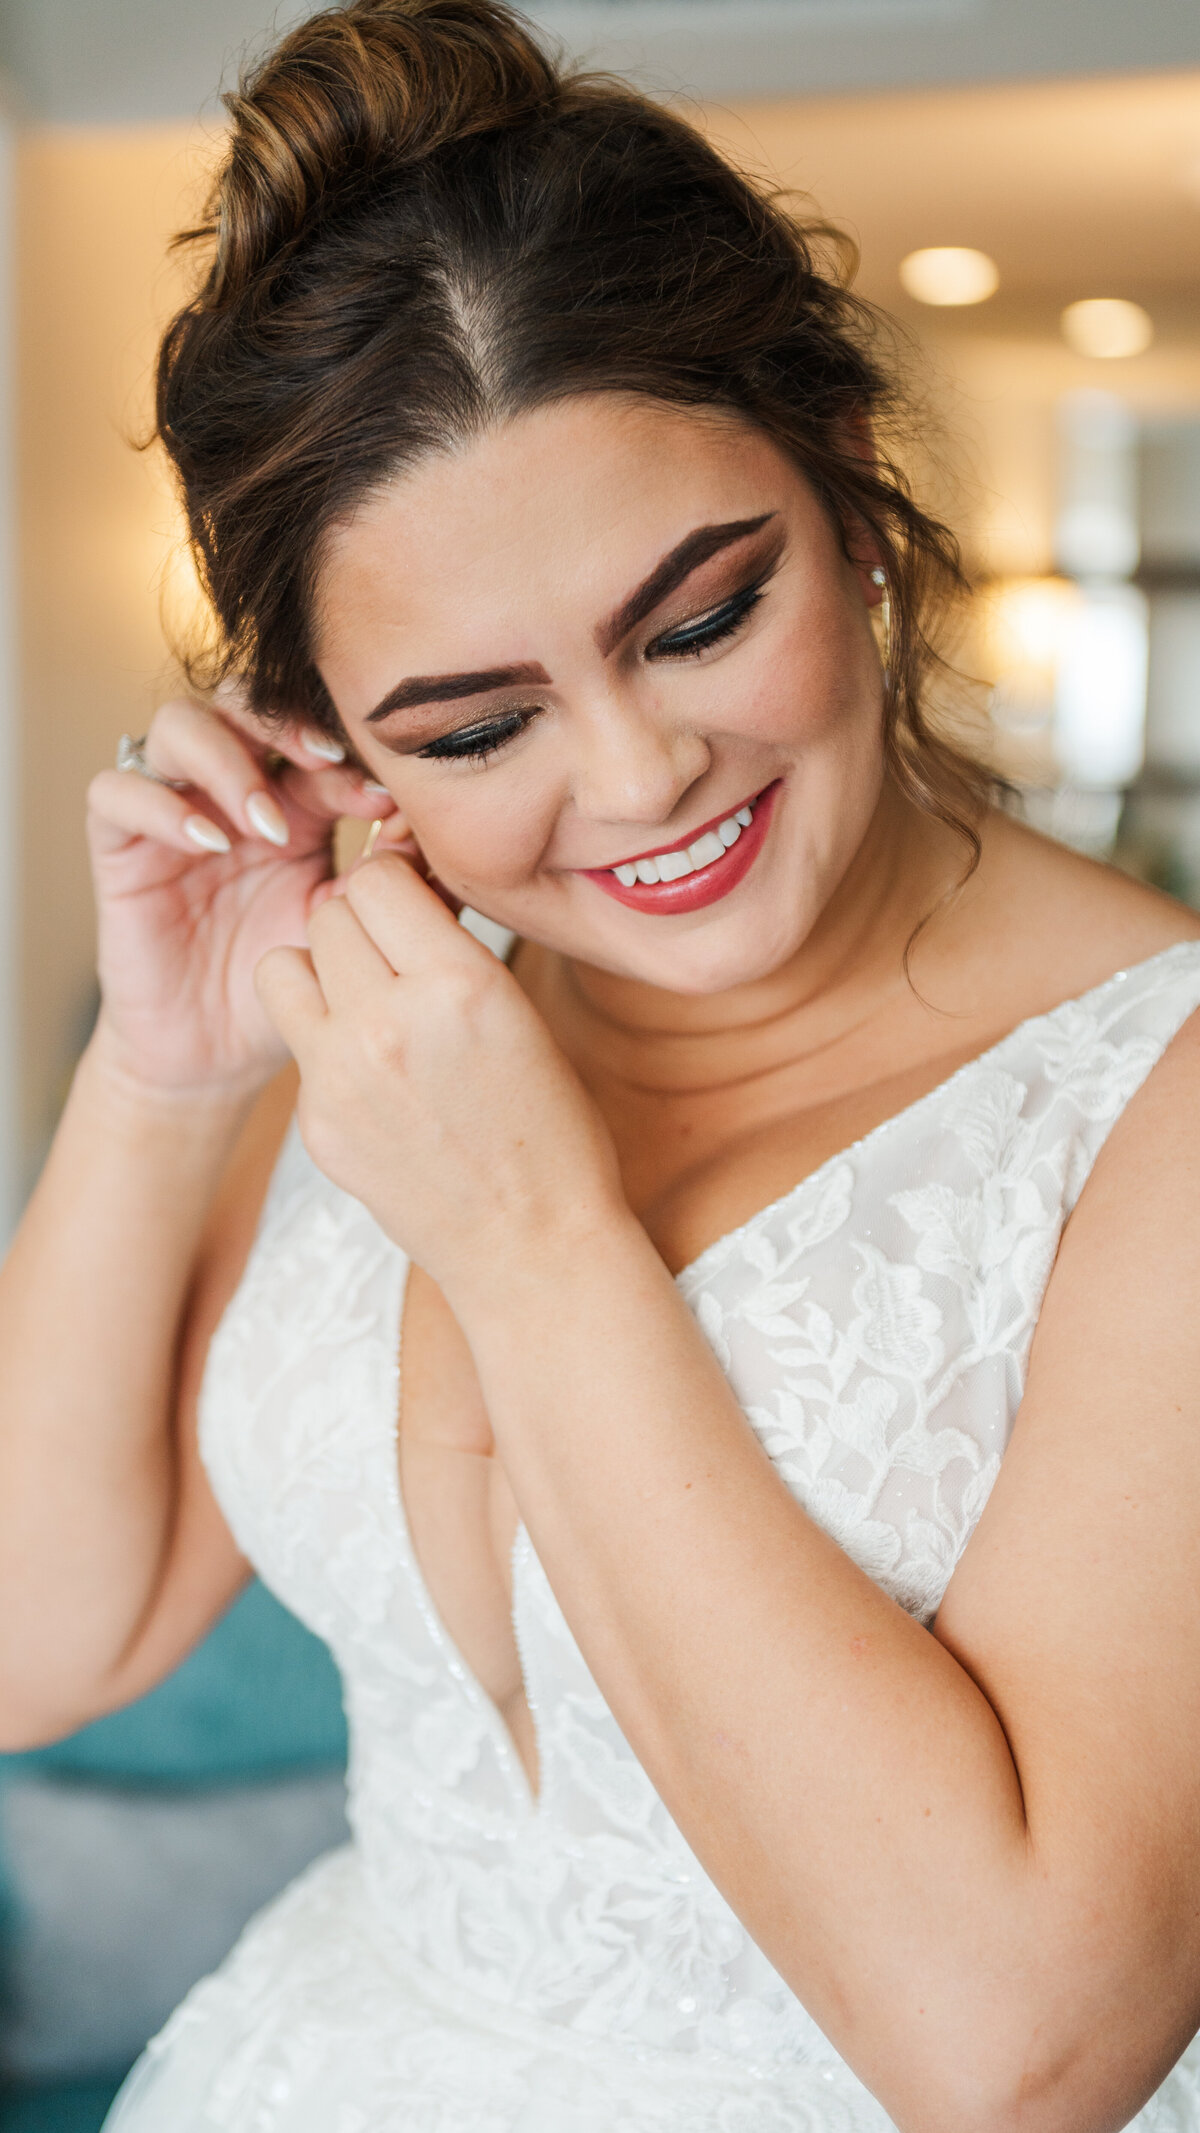 bride putting on her jewlery during her wedding day